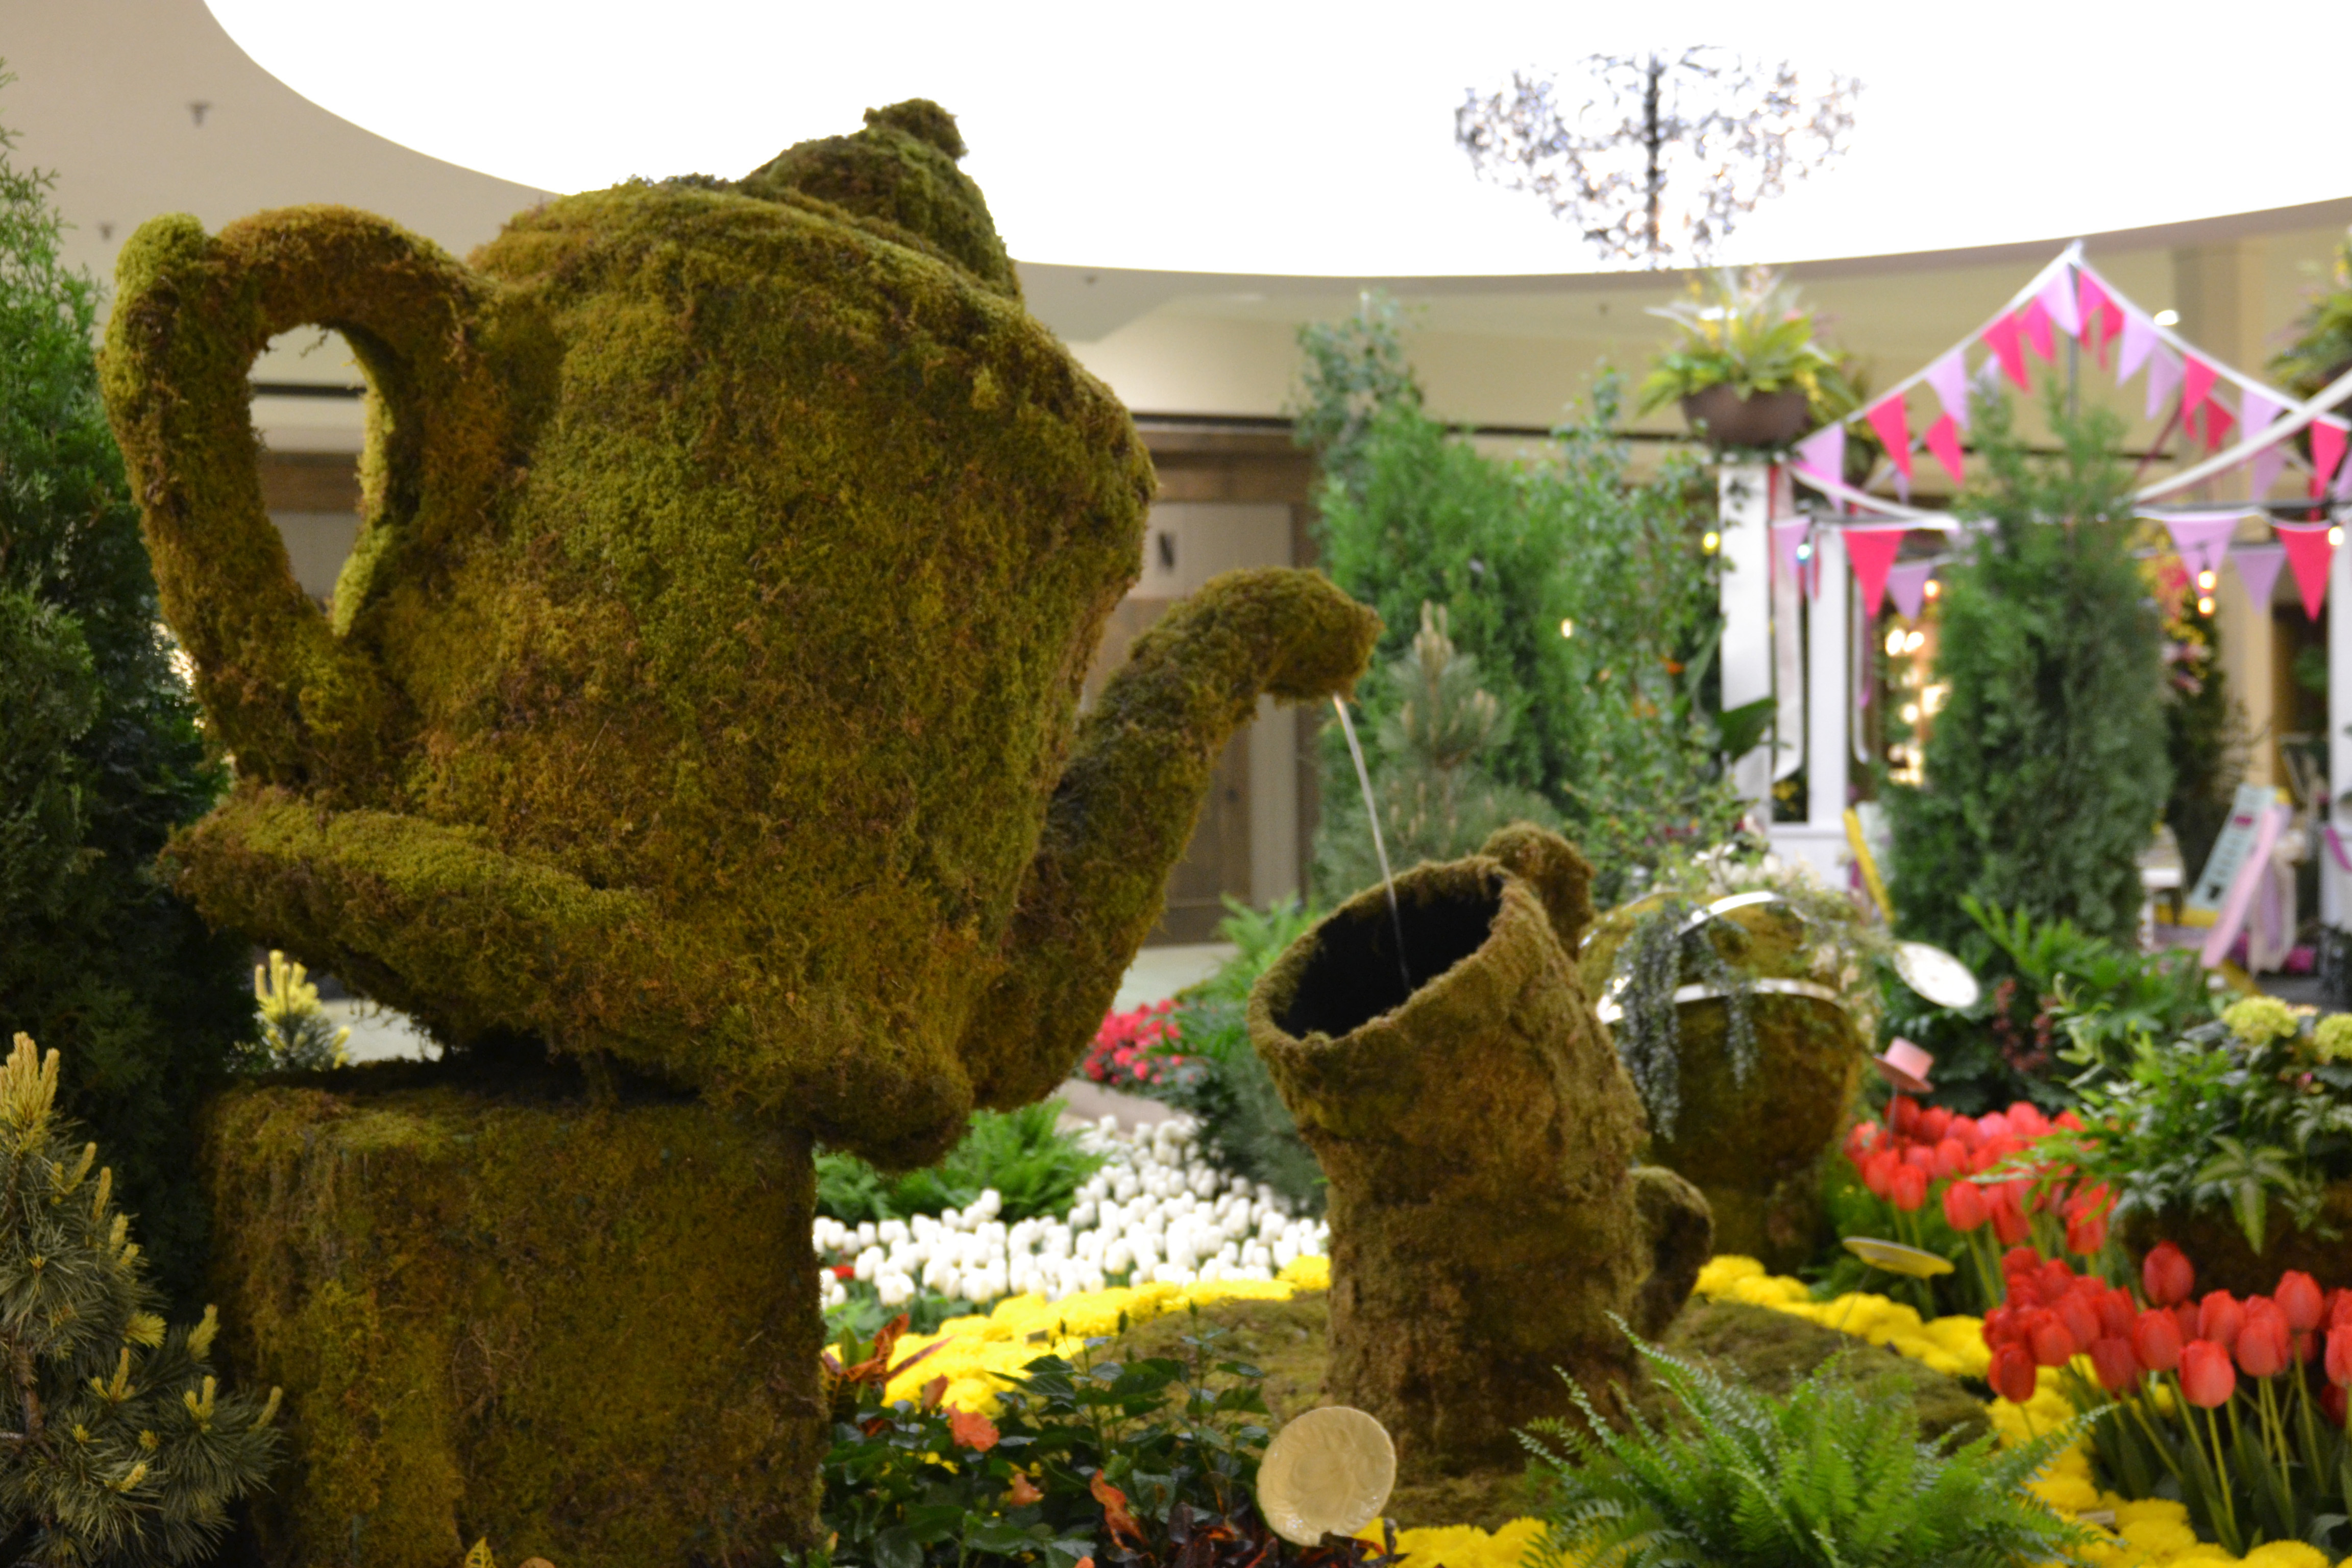 Bachman’s annual spring show is blooming inside the Galleria once again.